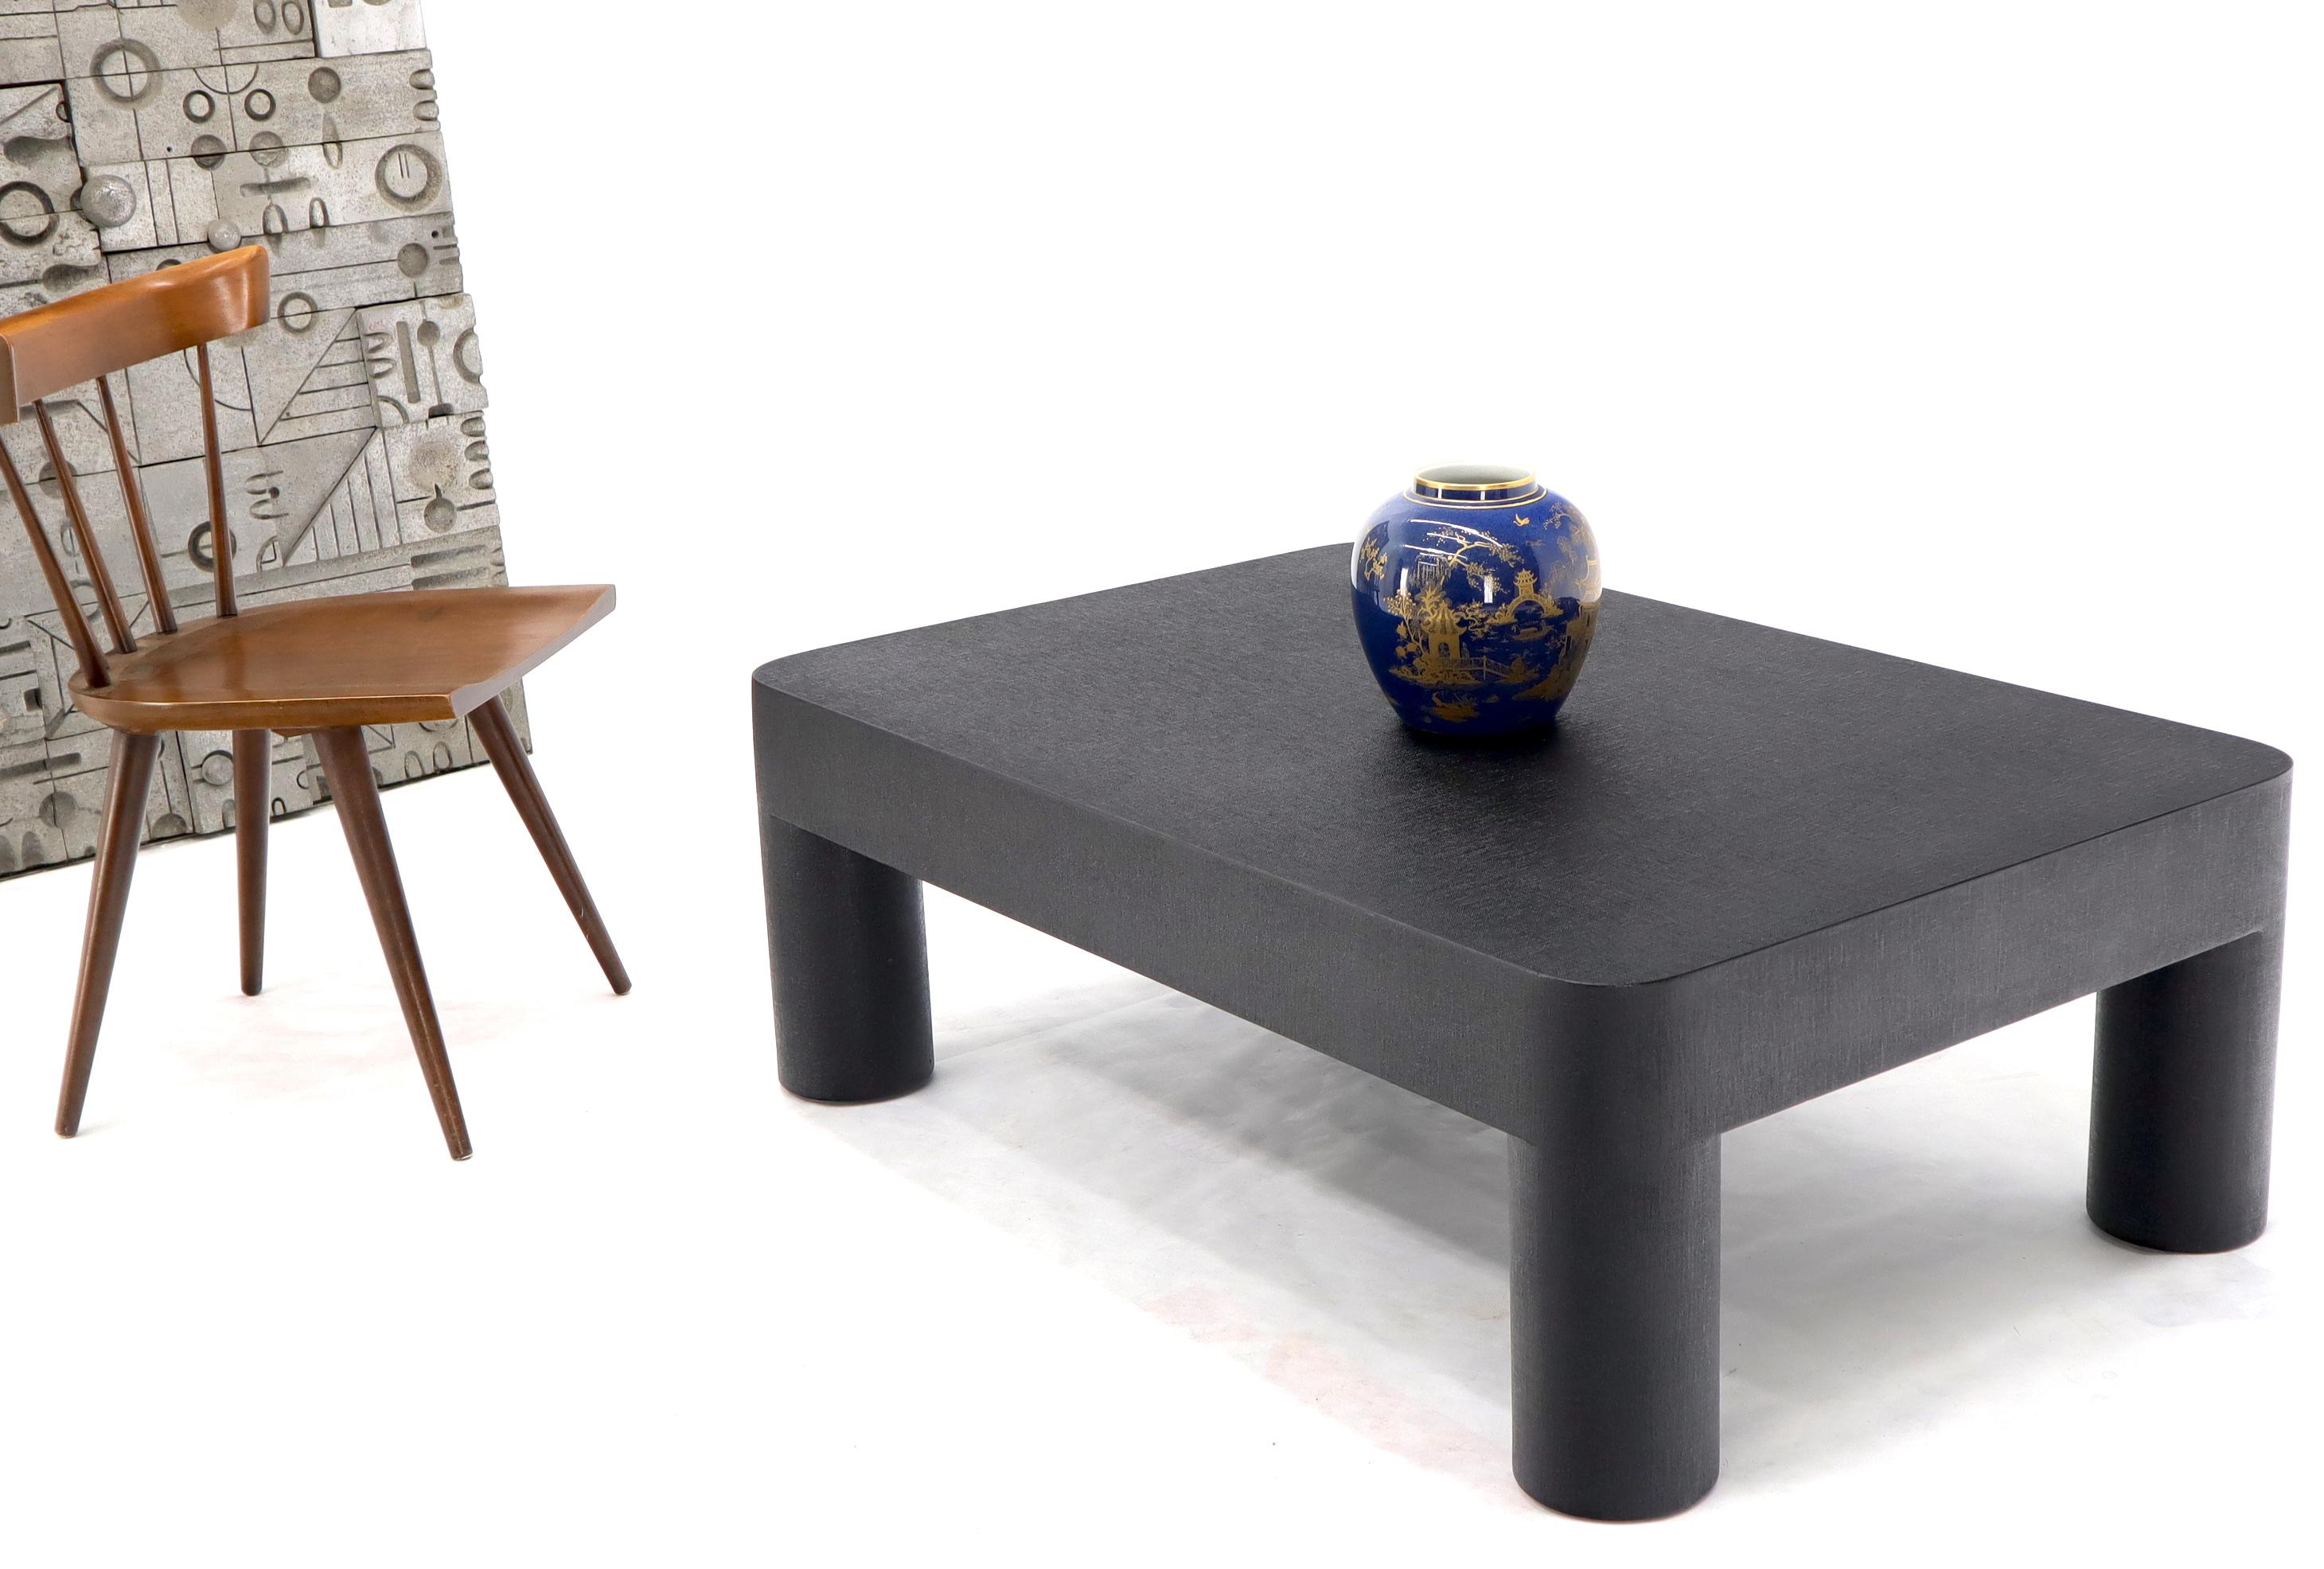 Pair of stunning Mid-Century Modern black lacquer raffia cloth wrapped coffee tables by Ernest C. Masi.